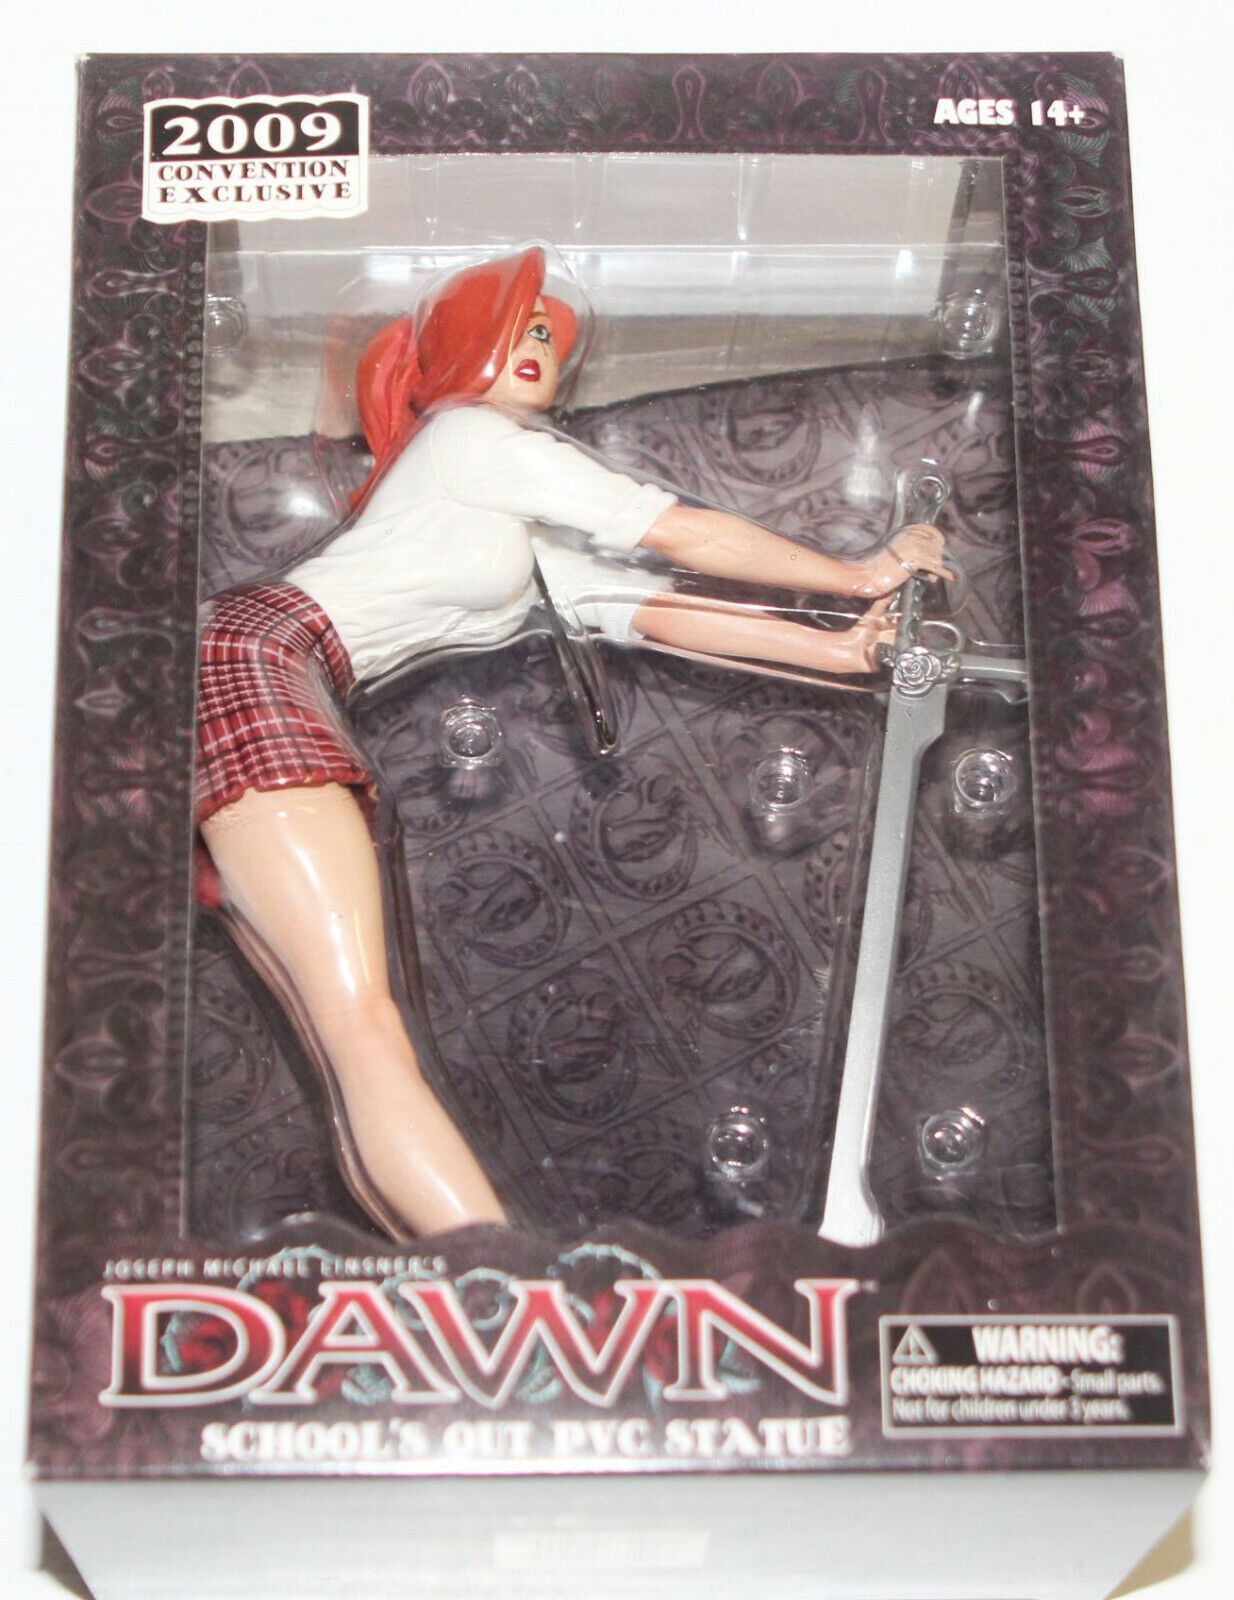 Dawn School\'s Out 2009 Convention ComicCon PVC Stature Joseph Linsner Red Skirt